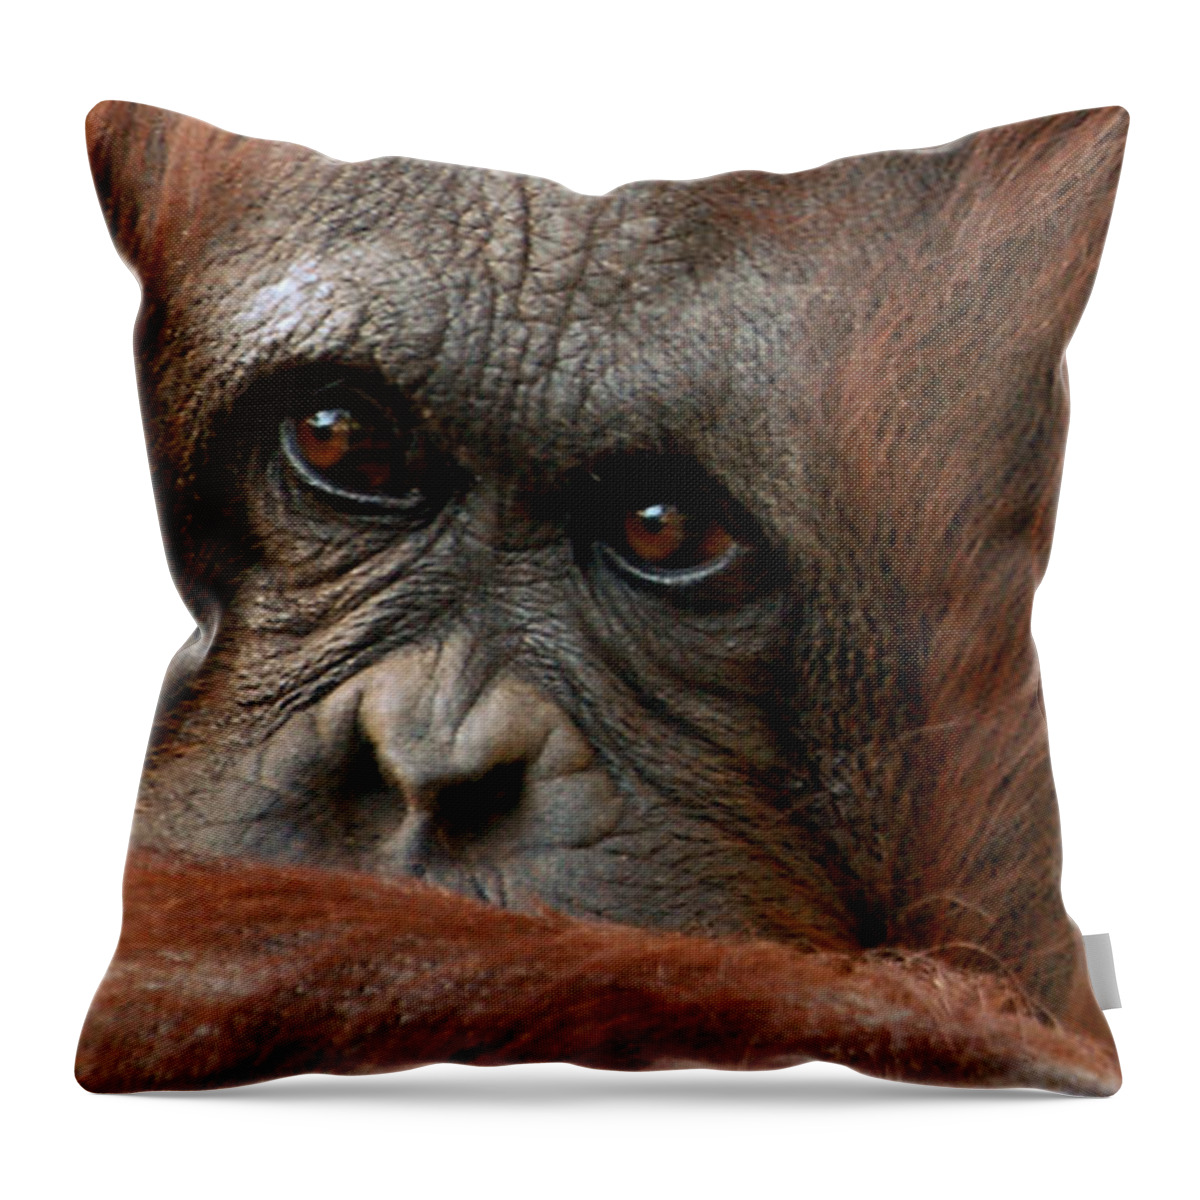 Primate Throw Pillow featuring the photograph Pensive by Donna Proctor